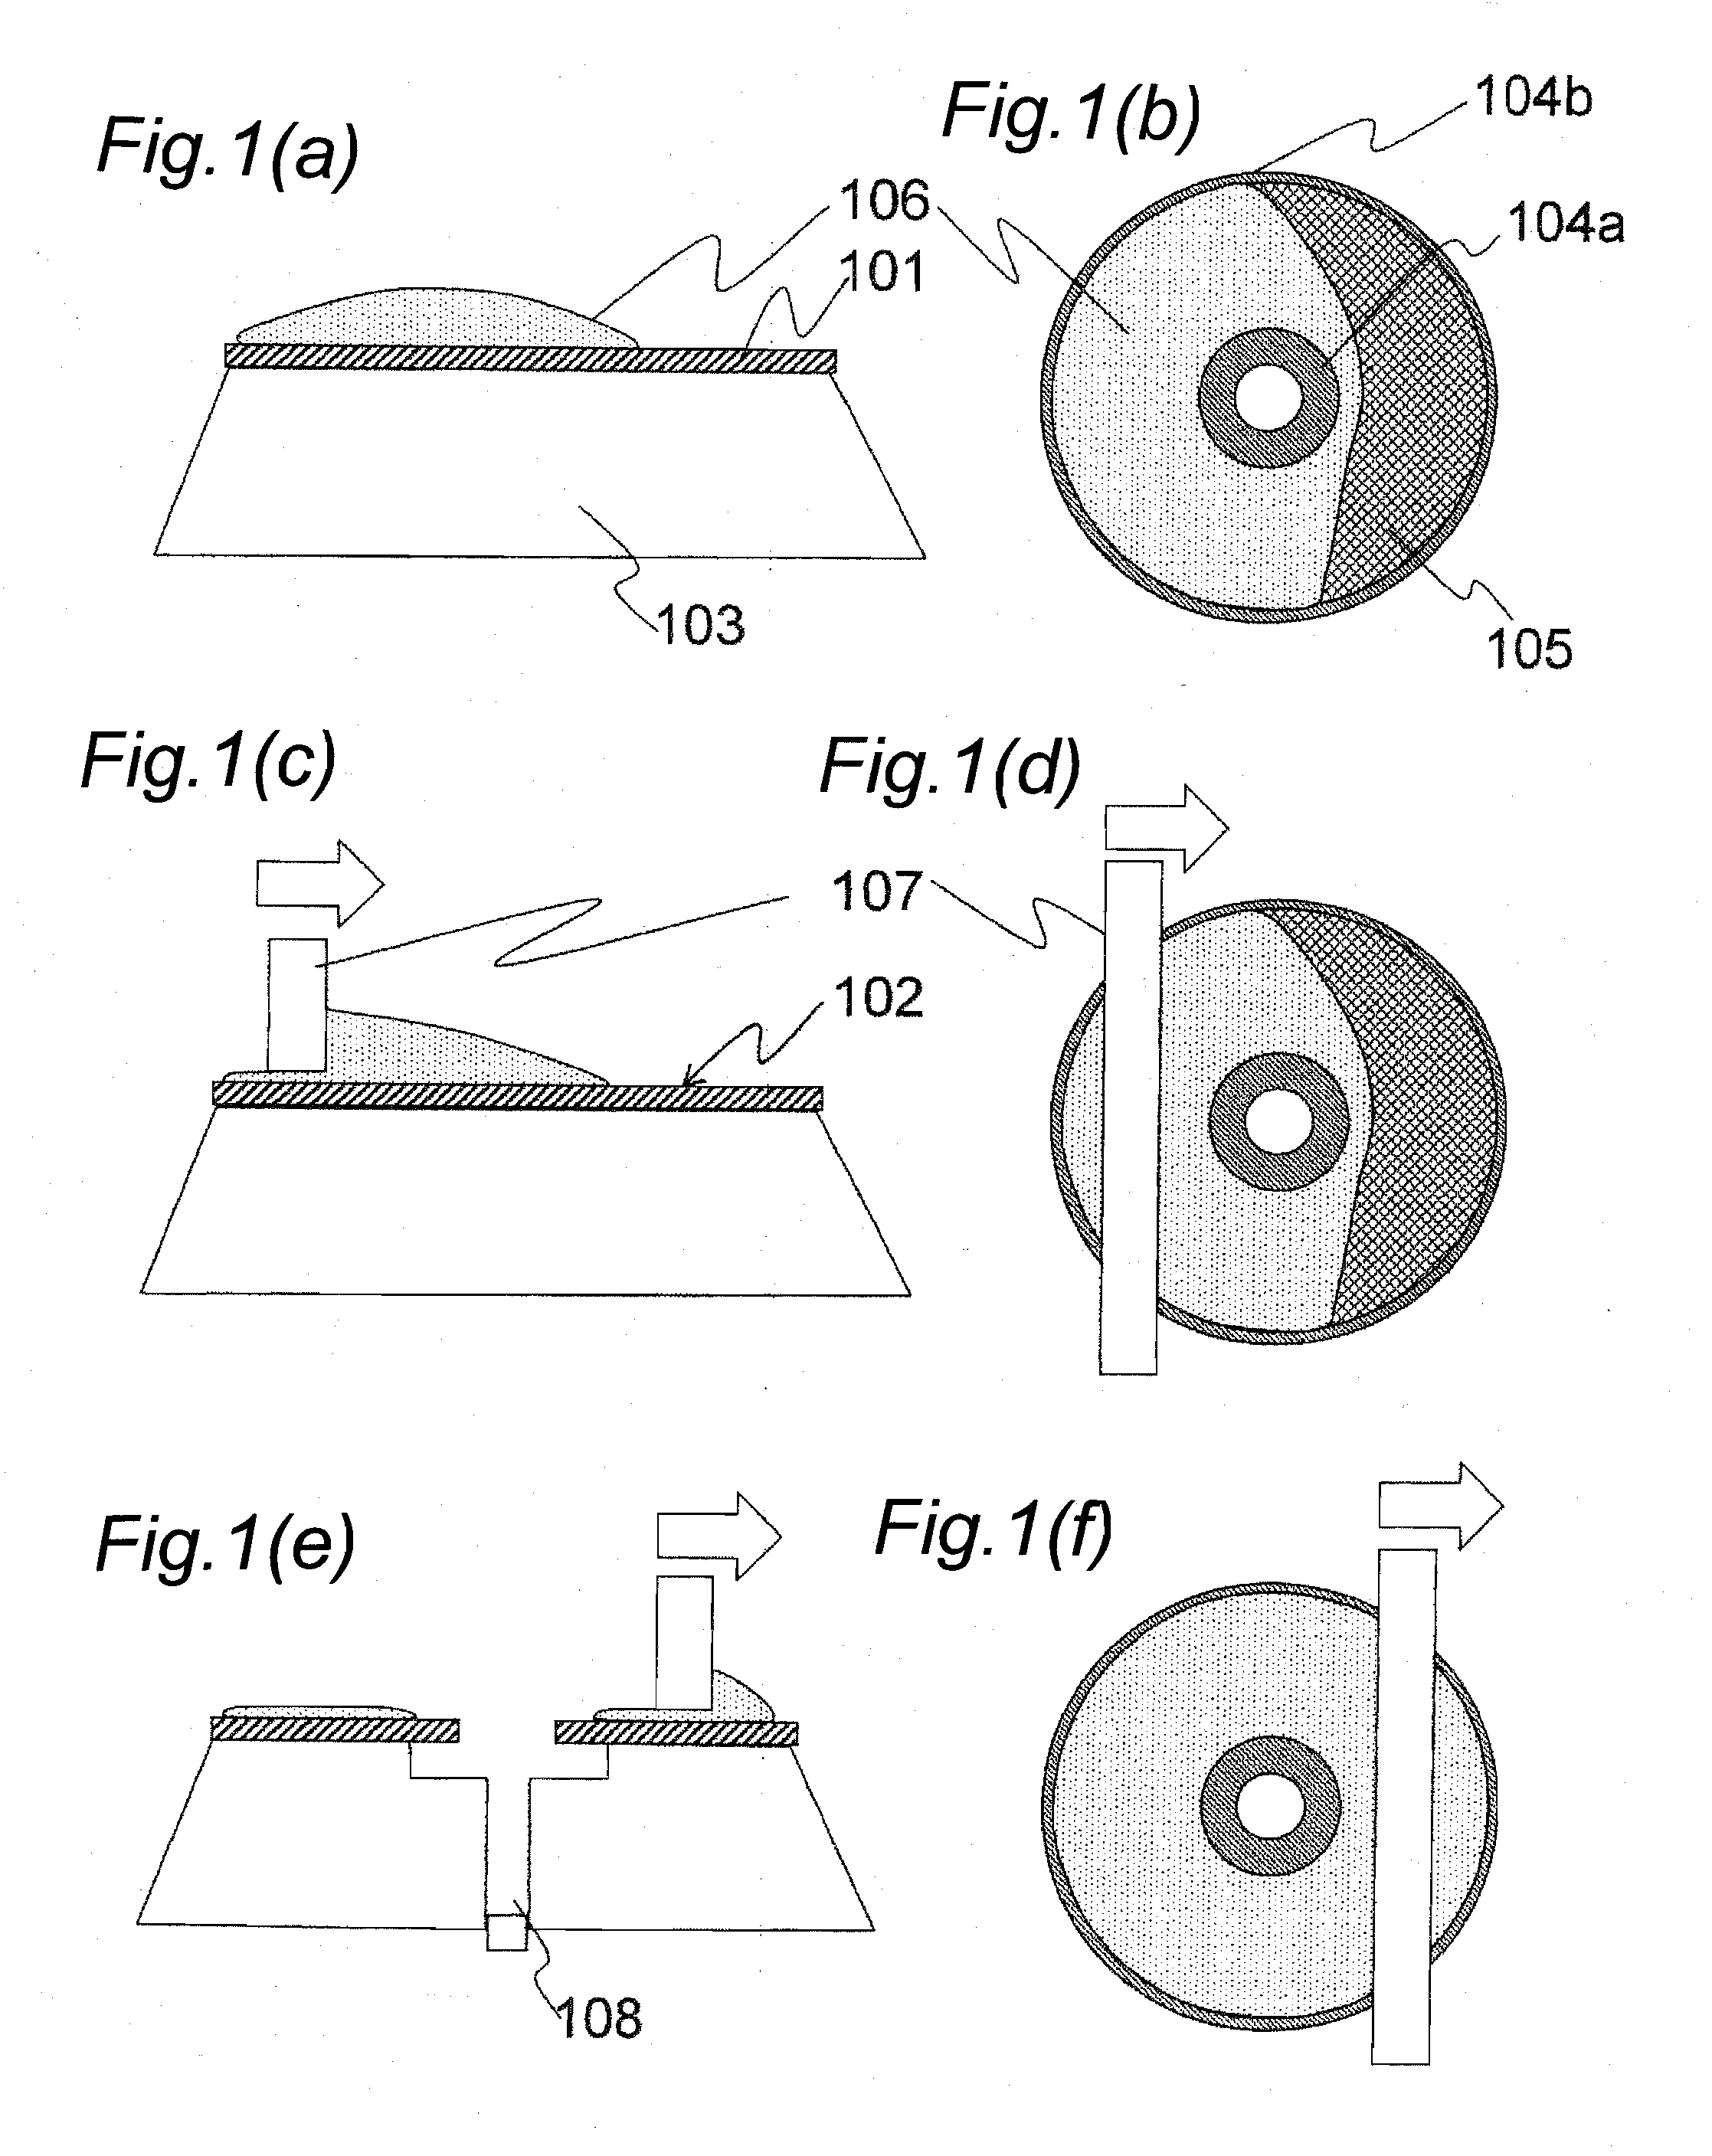 Multilayer information recording medium and production method therefor